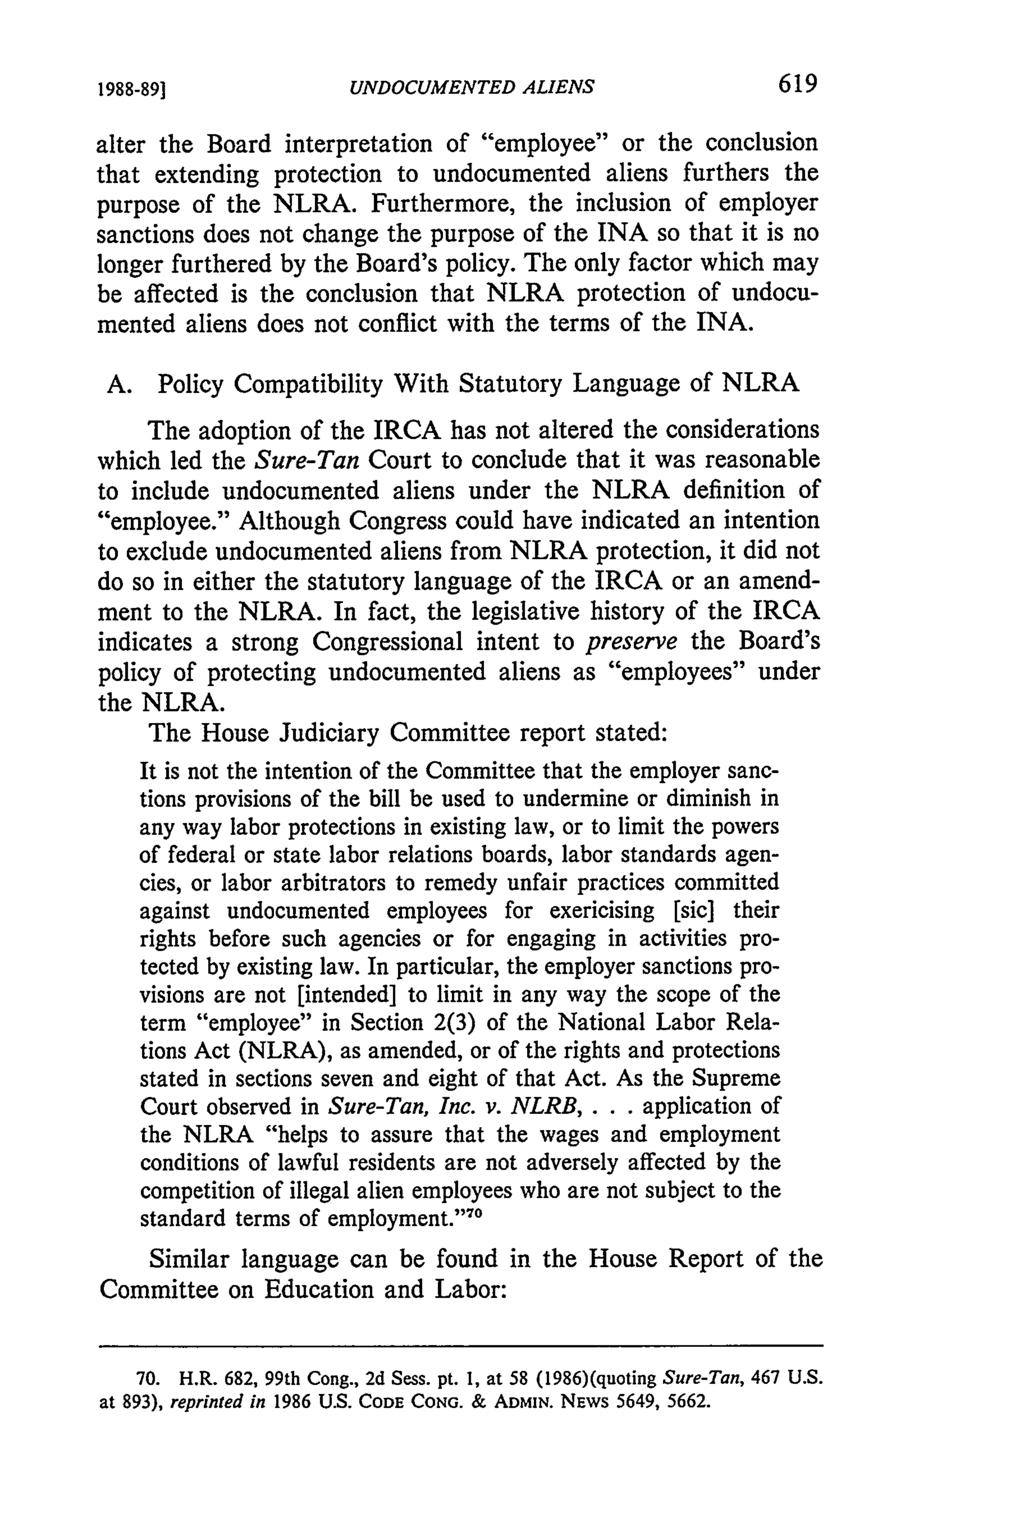 1988-89] UNDOCUMENTED ALIENS alter the Board interpretation of "employee" or the conclusion that extending protection to undocumented aliens furthers the purpose of the NLRA.